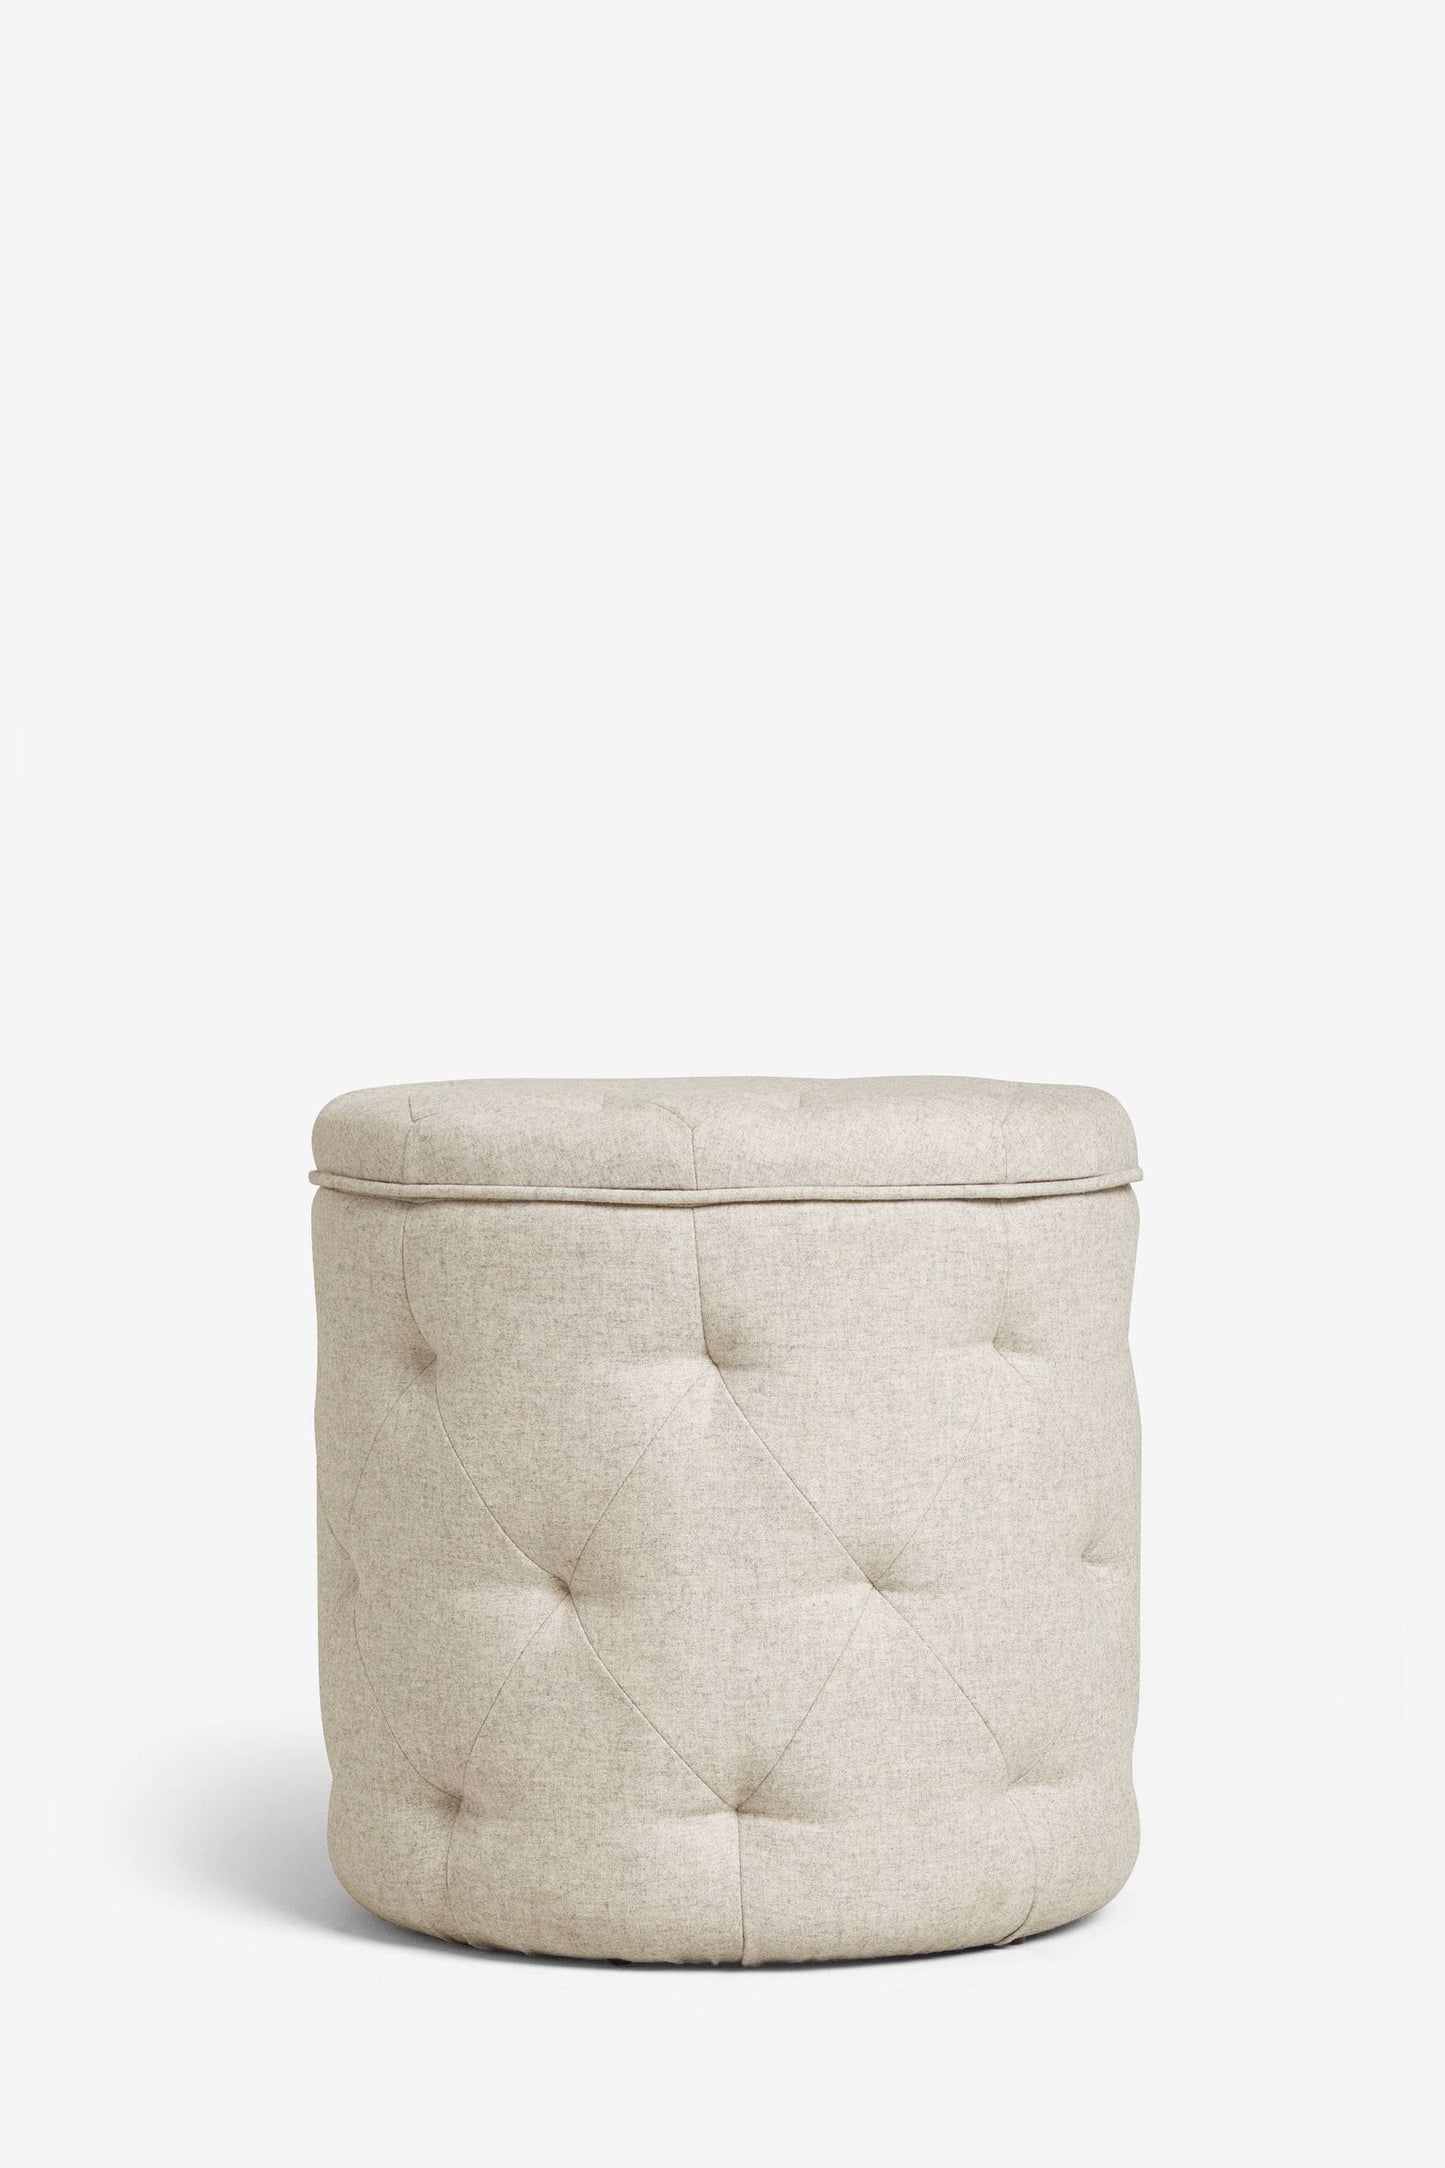 Harfoot Upholstered Storage Footstool - Wool Blend Natural Stone